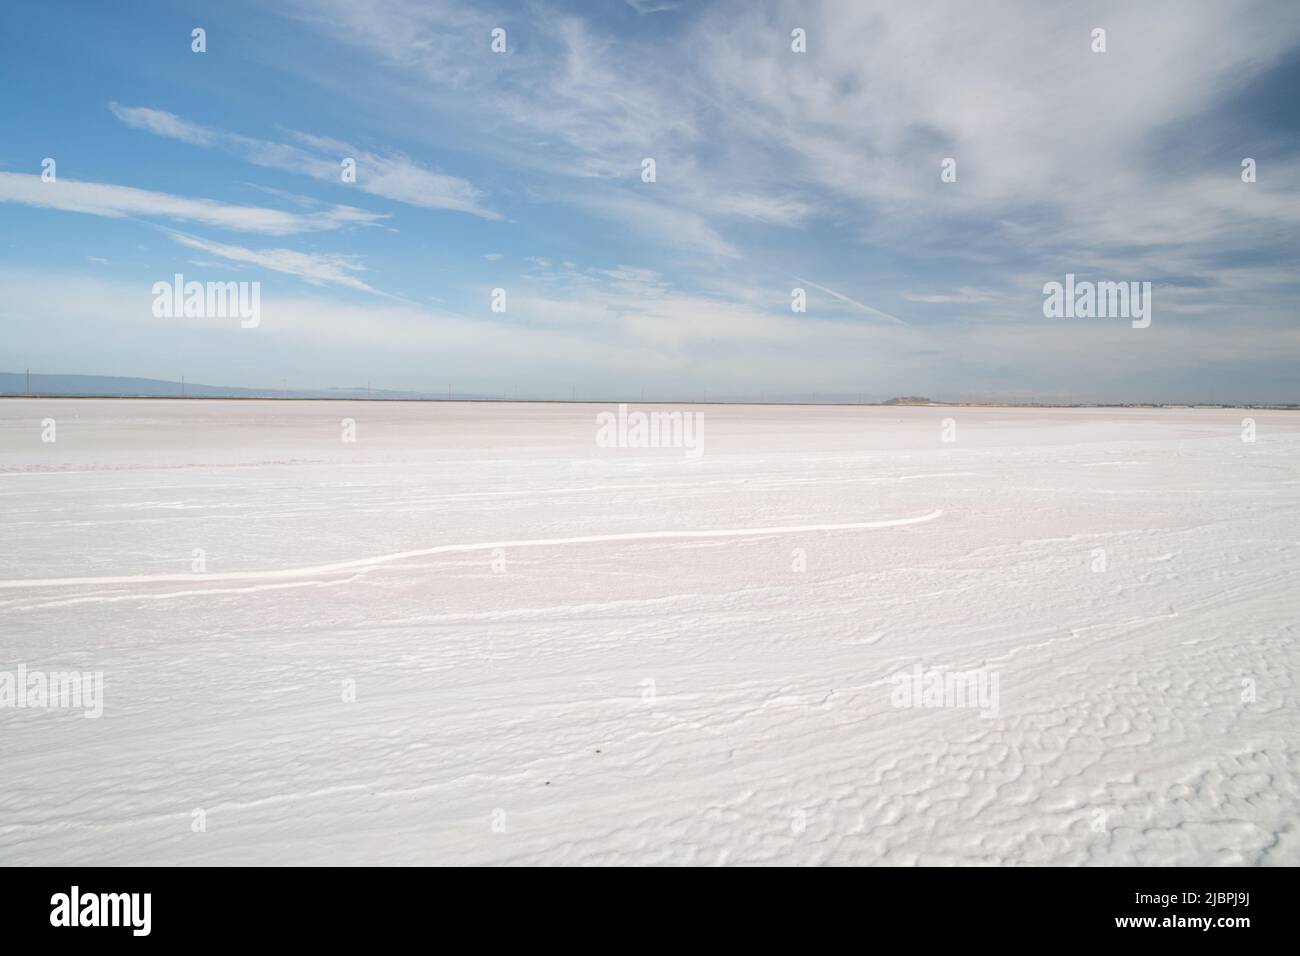 The vast open landscape of the salt fields where seasalt is produced. Stock Photo